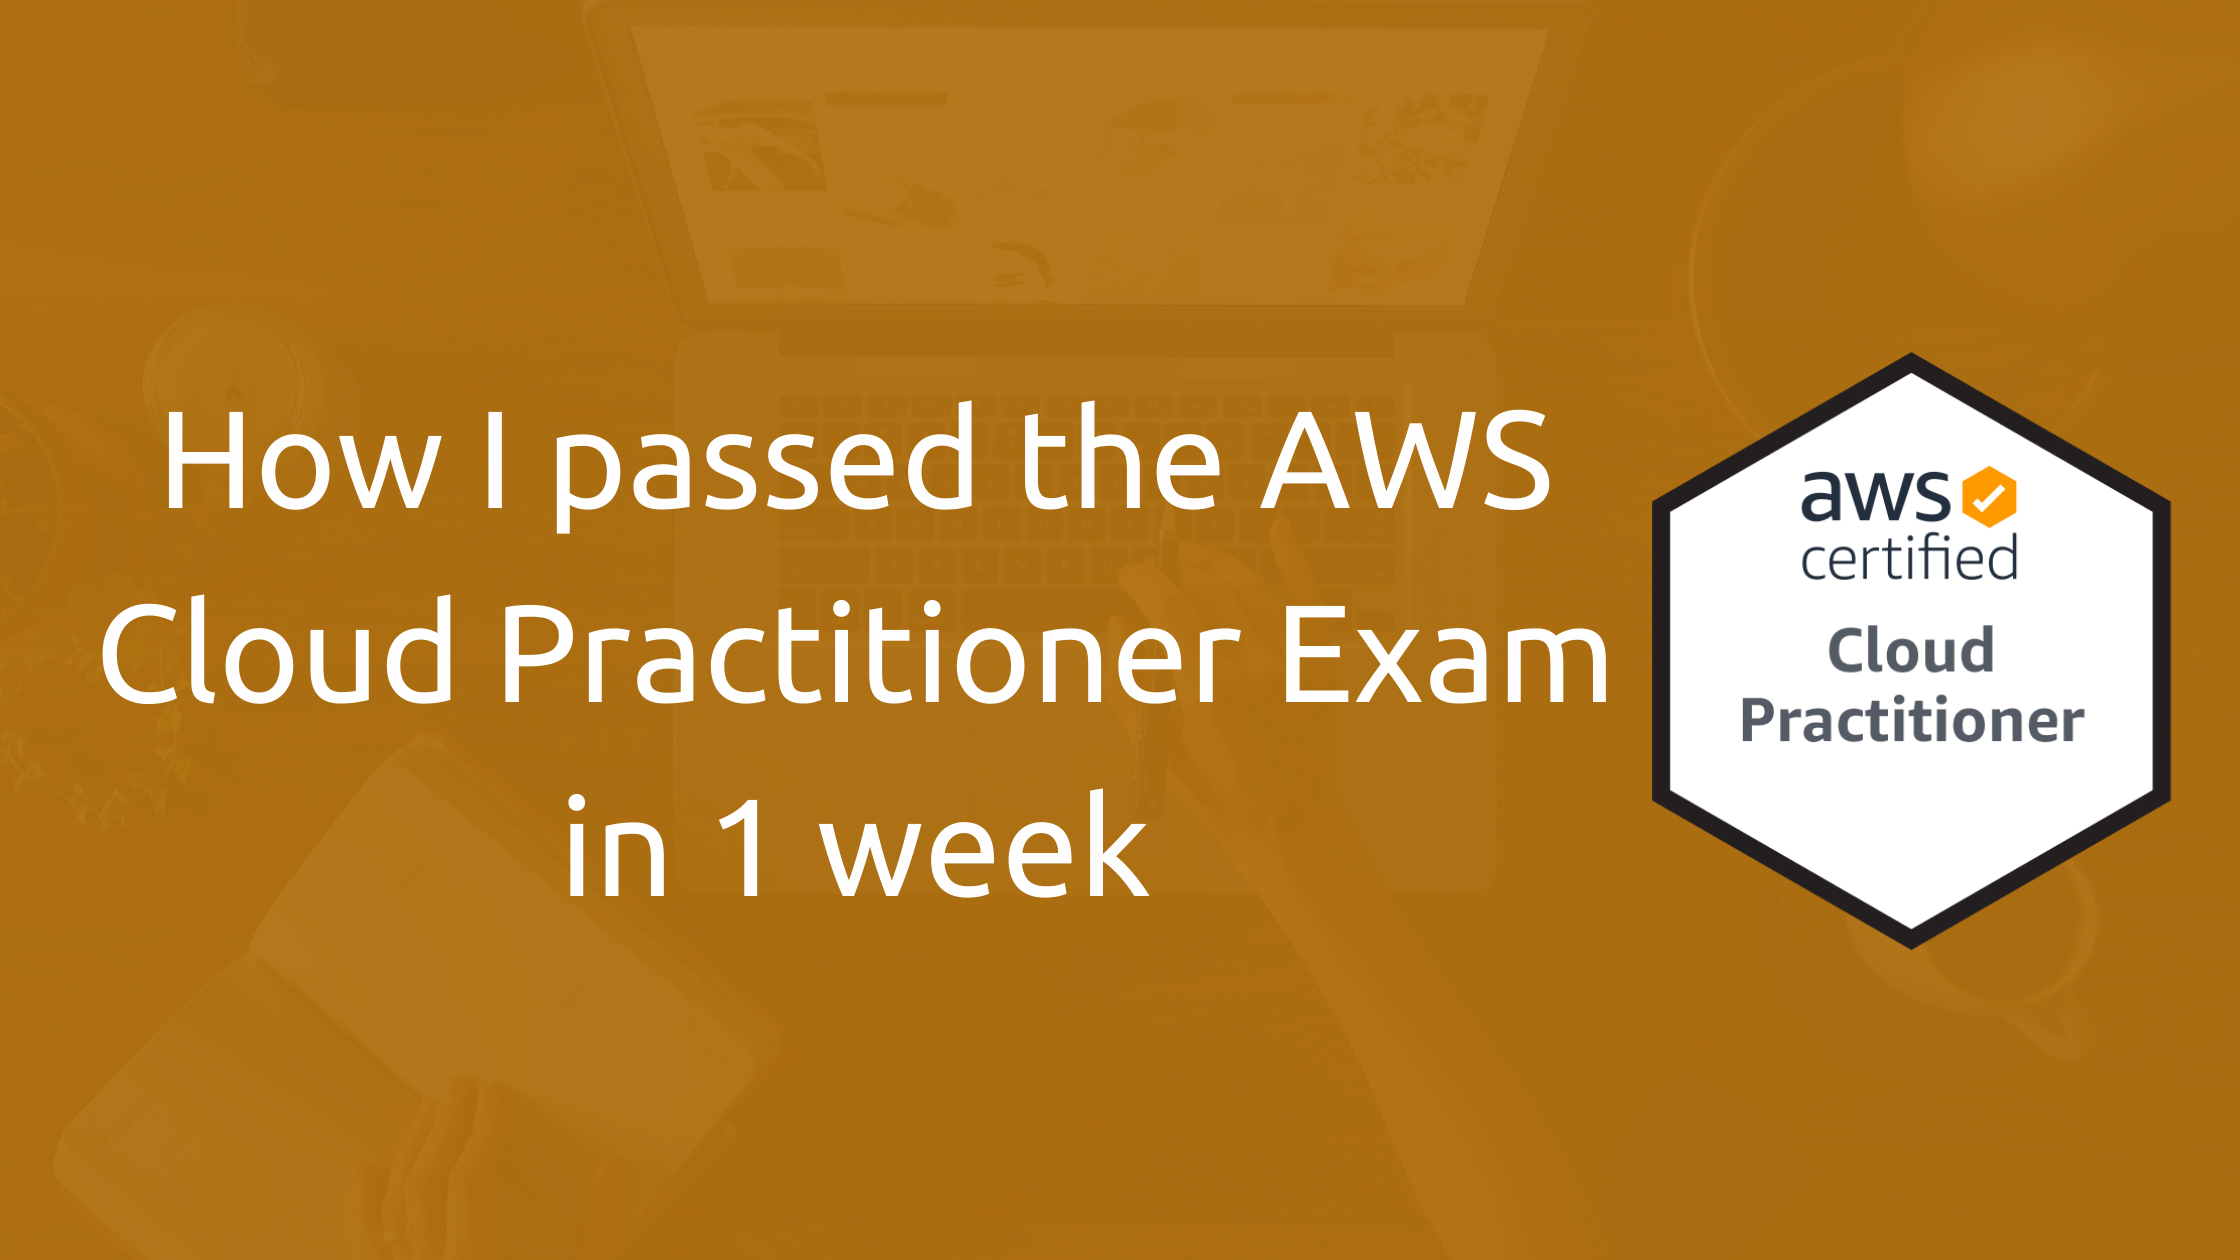 How I passed the AWS Cloud Practitioner Exam in 1 week